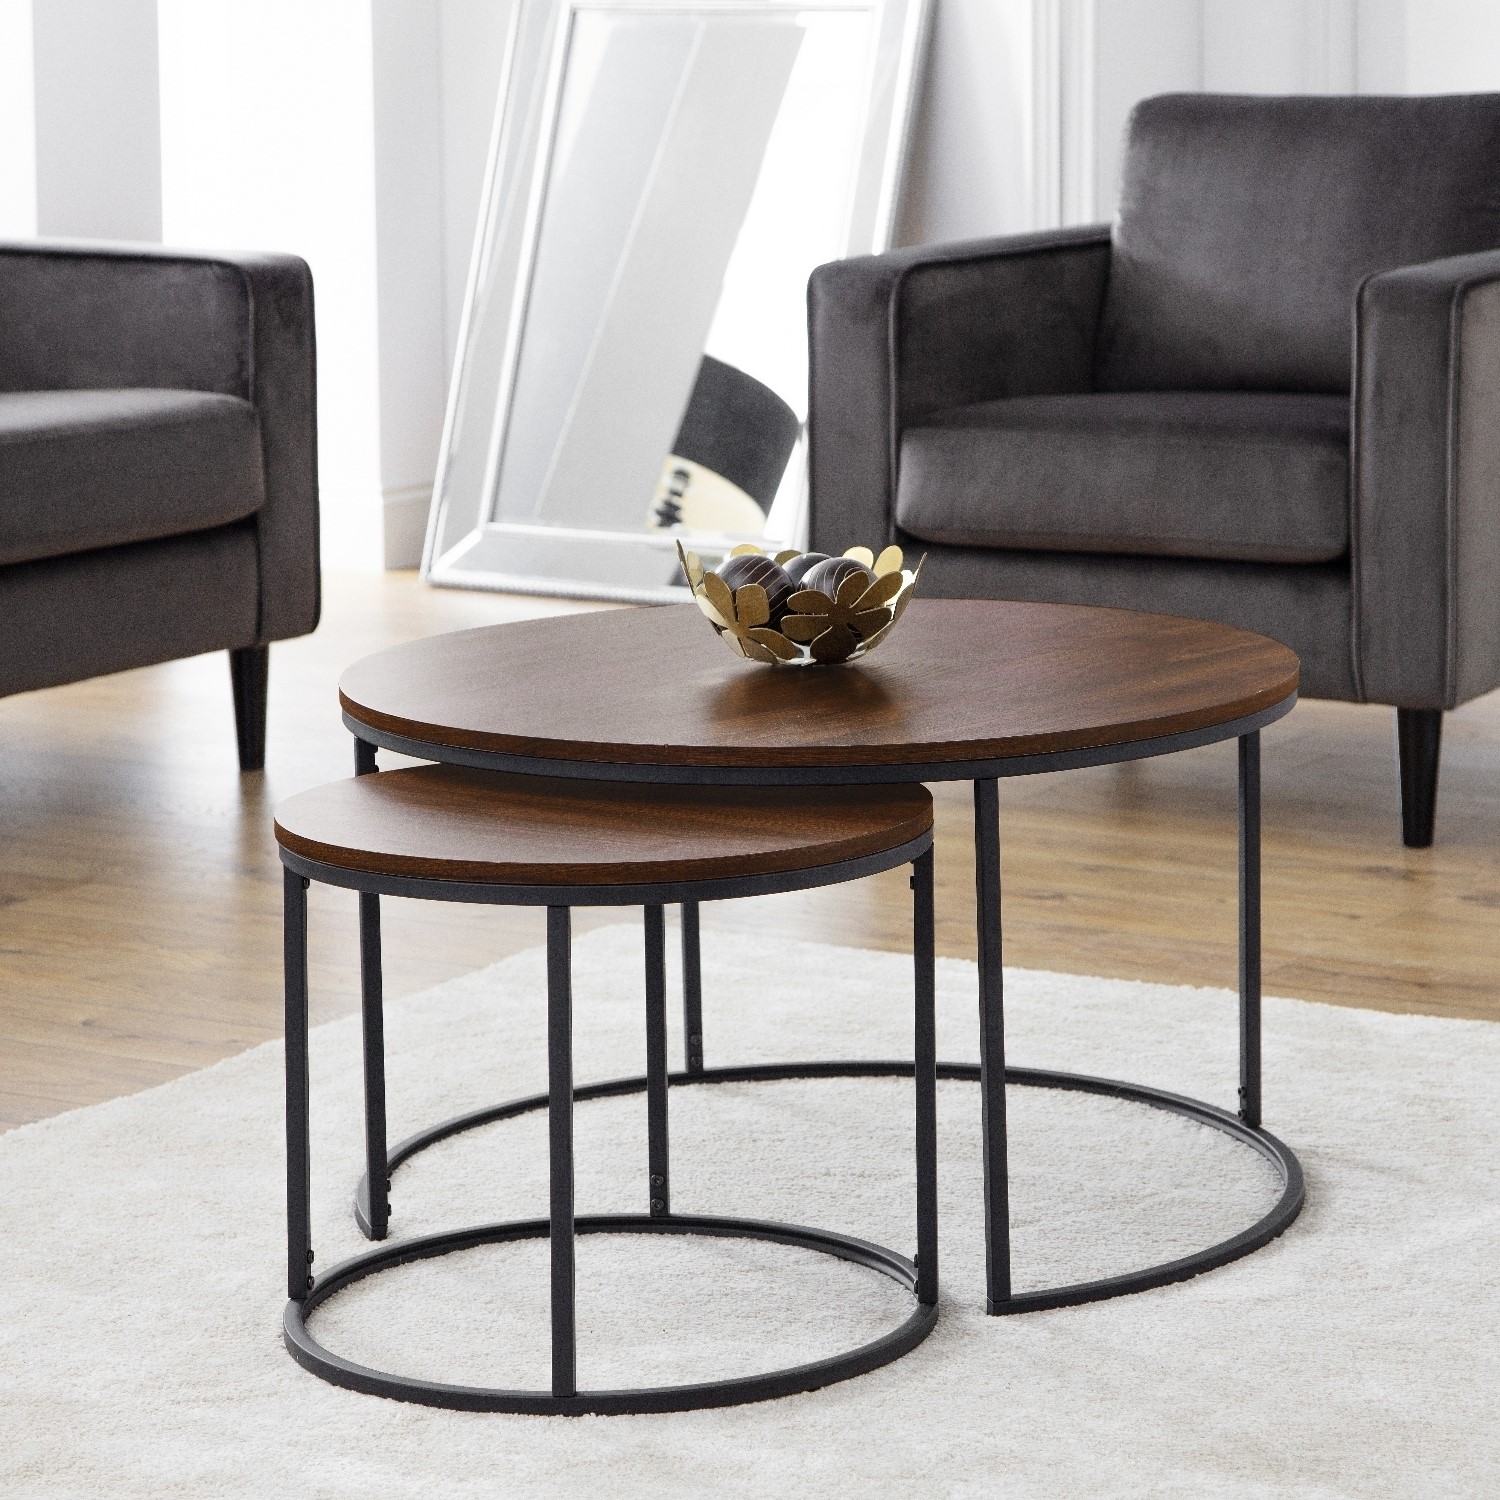 Photo of Round dark wood round nest of coffee tables with black metal base - julian bowen bellini